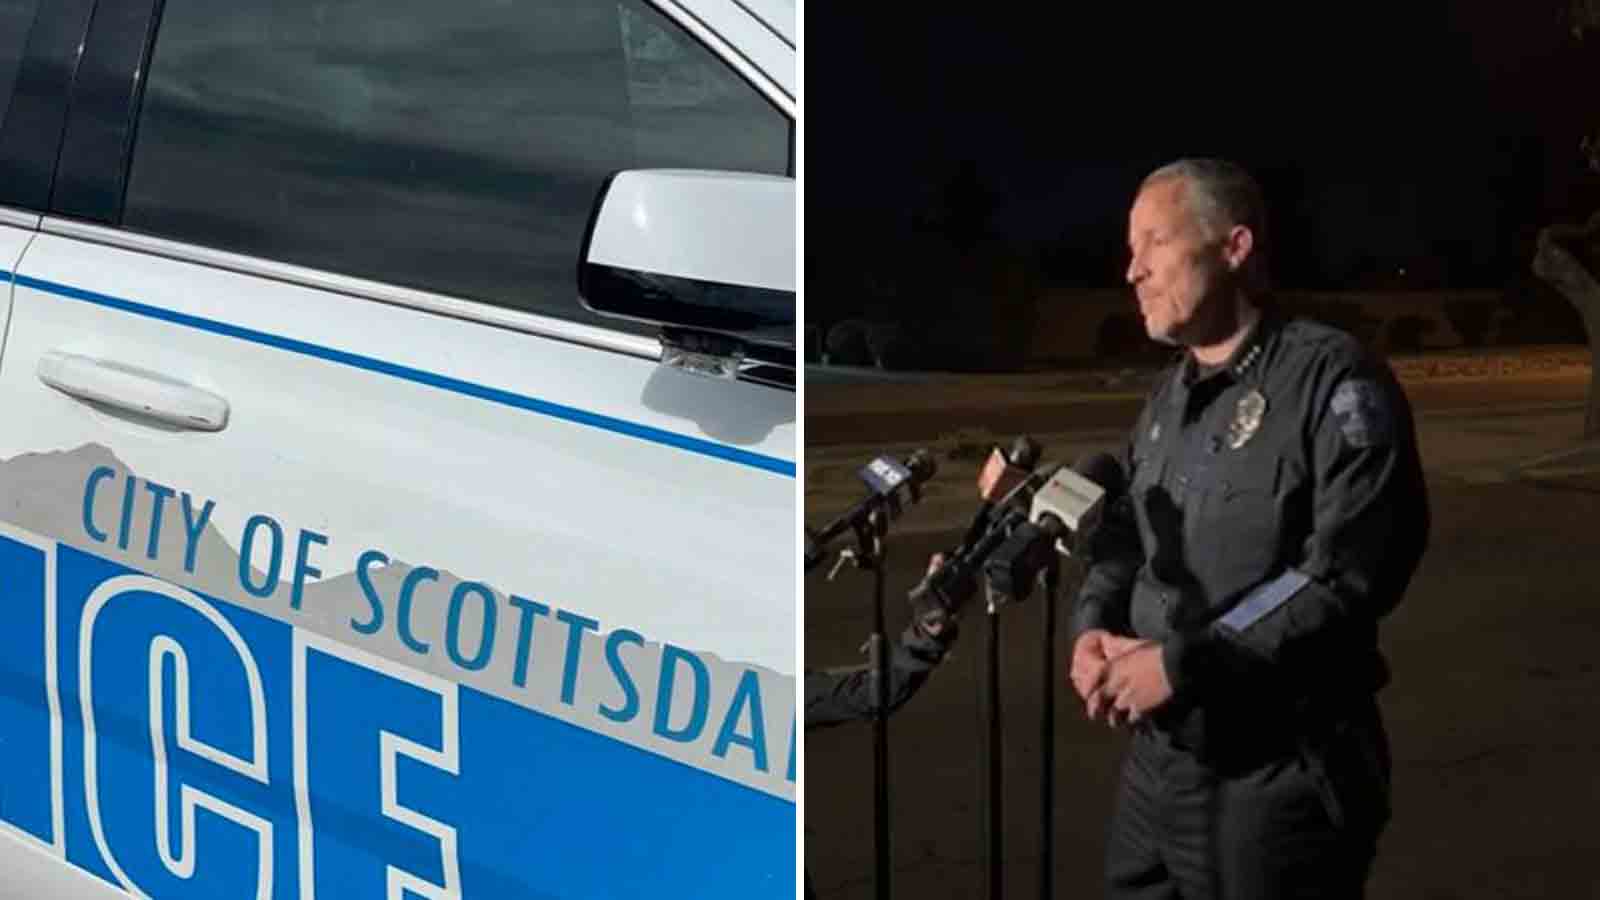 Man fatally shot by Scottsdale police after he opened fire on them during traffic stop